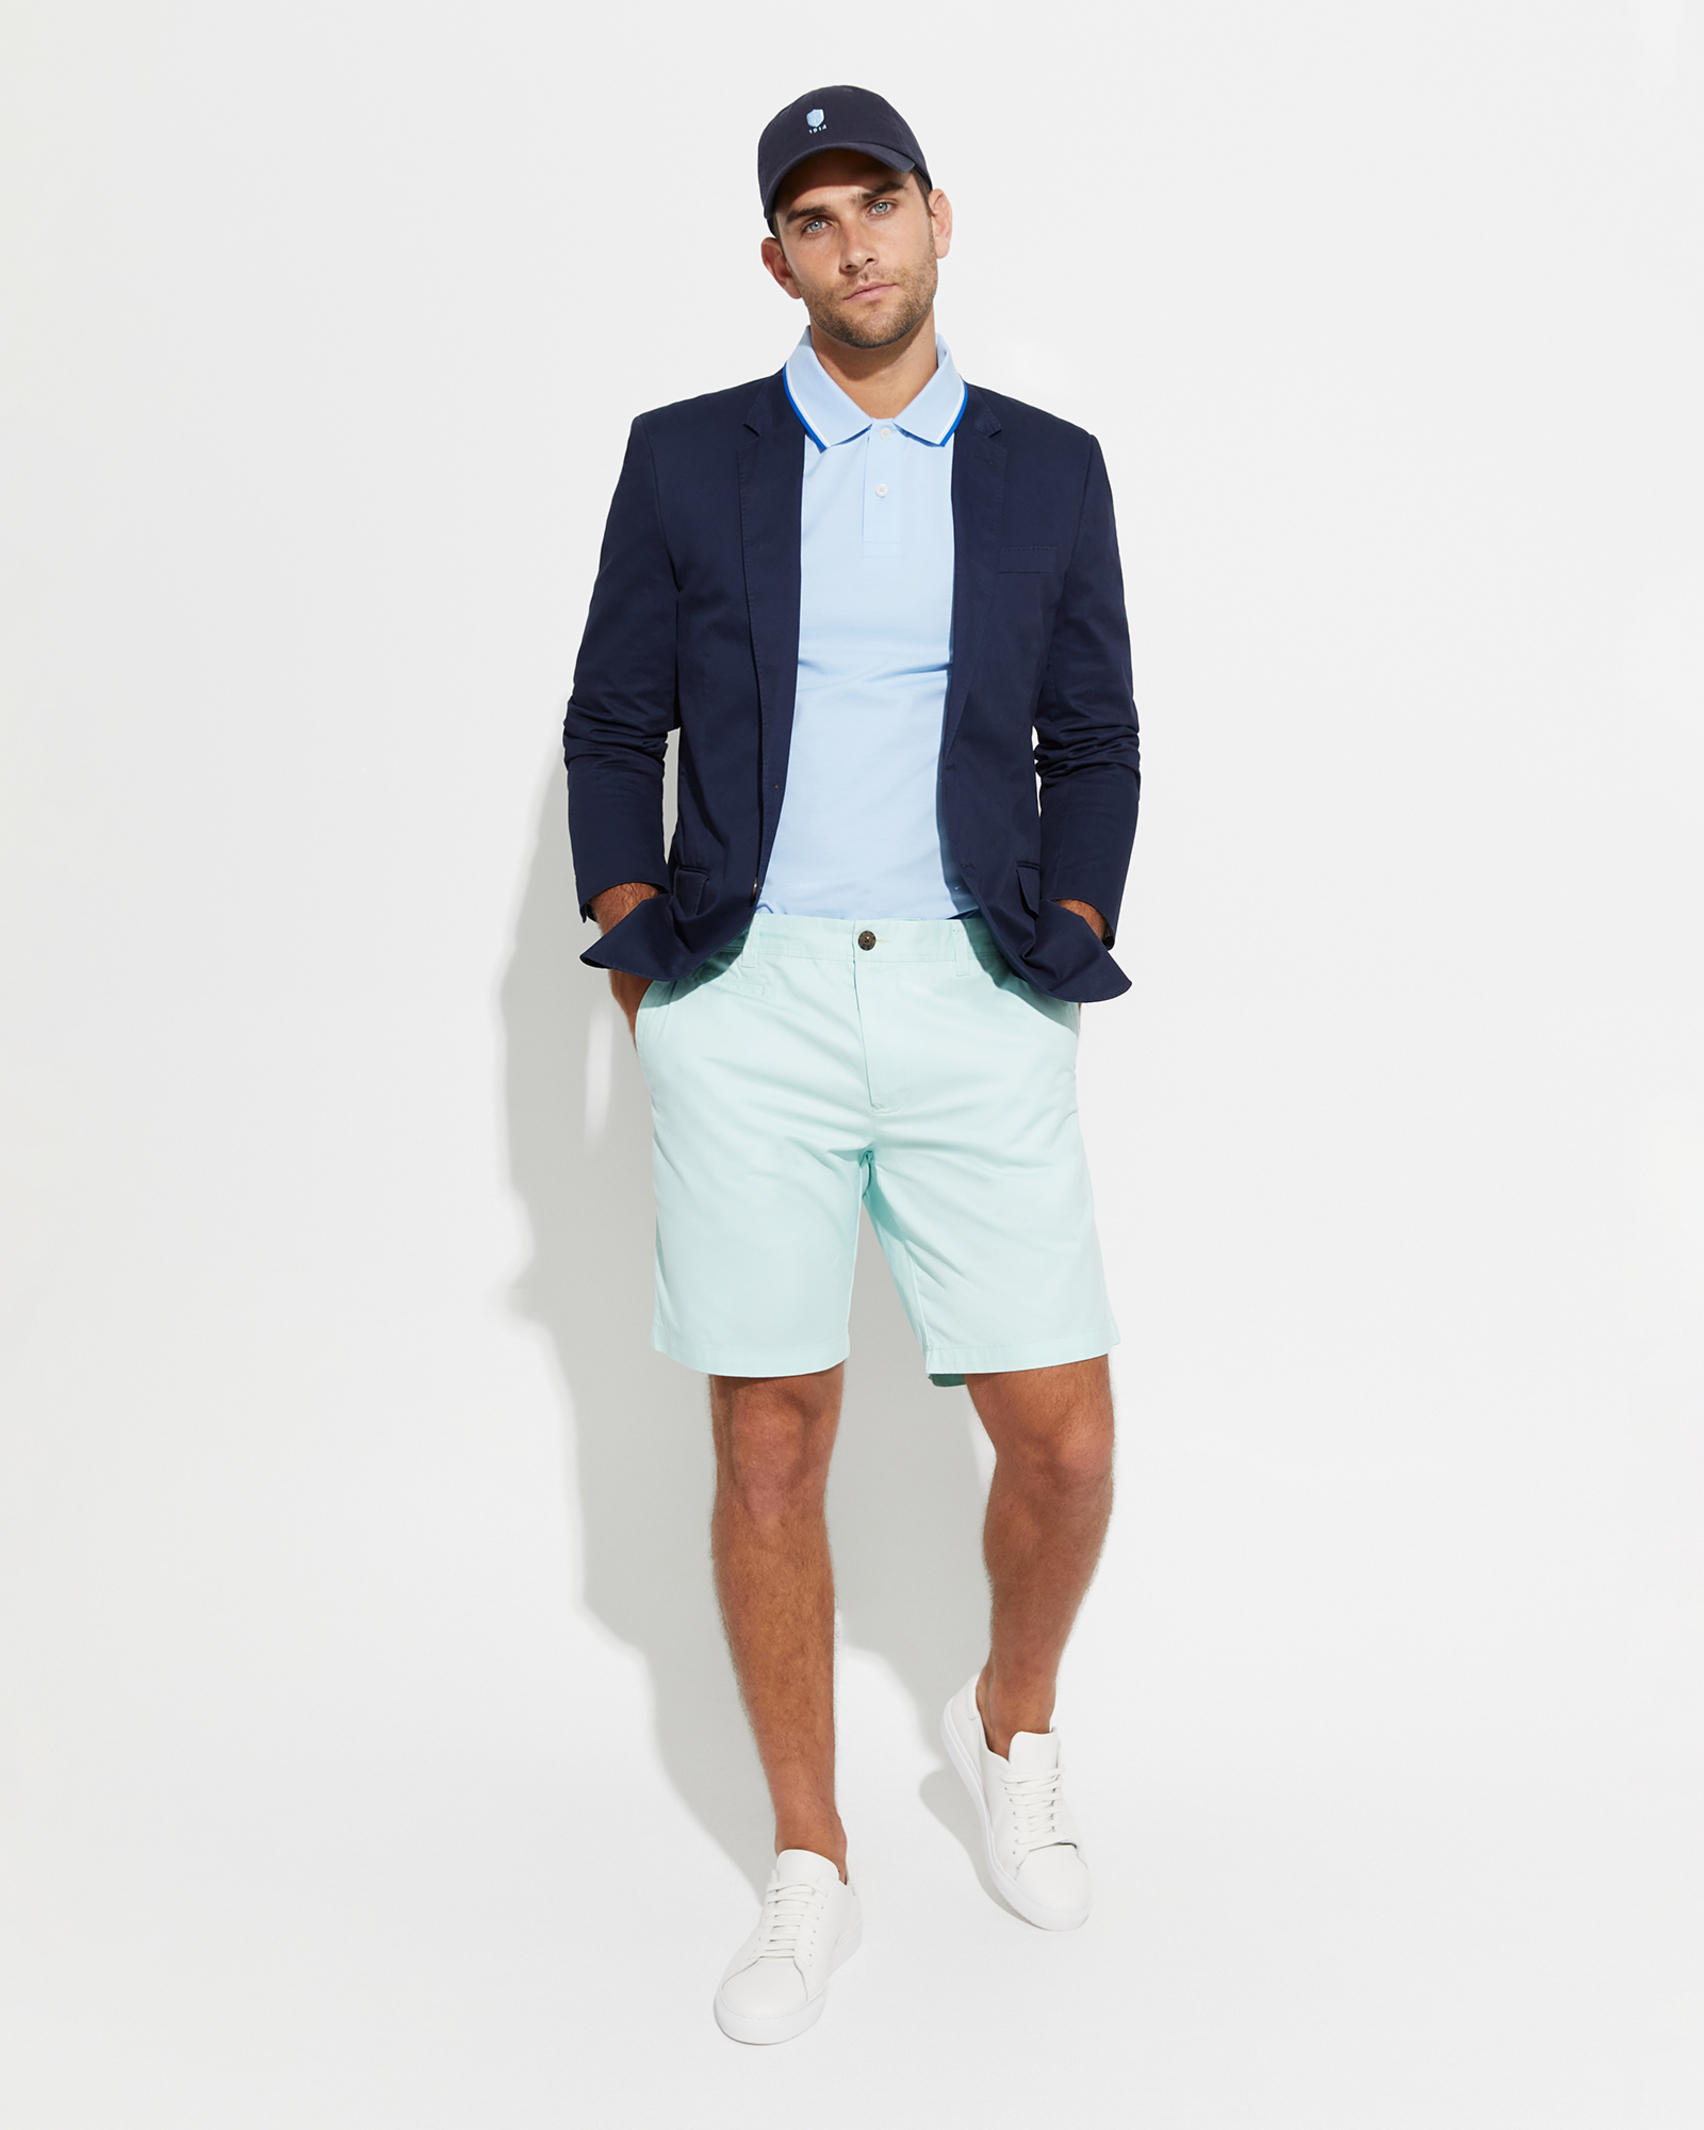 Classic Chino Short in MINT